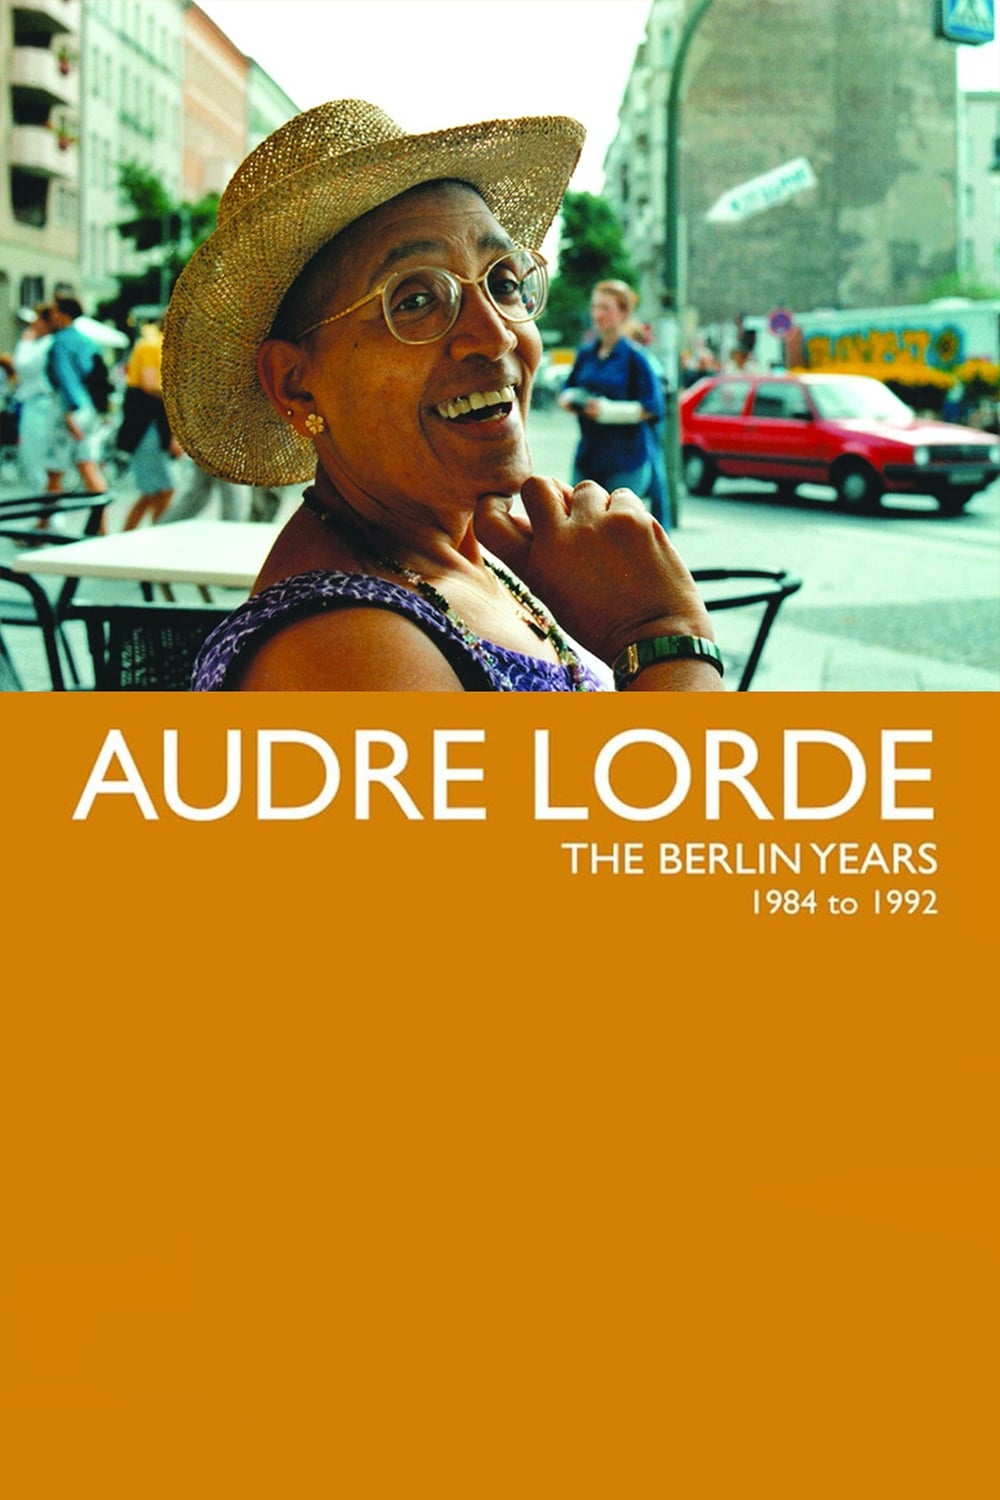 Audre Lorde: The Berlin Years 1984-1992